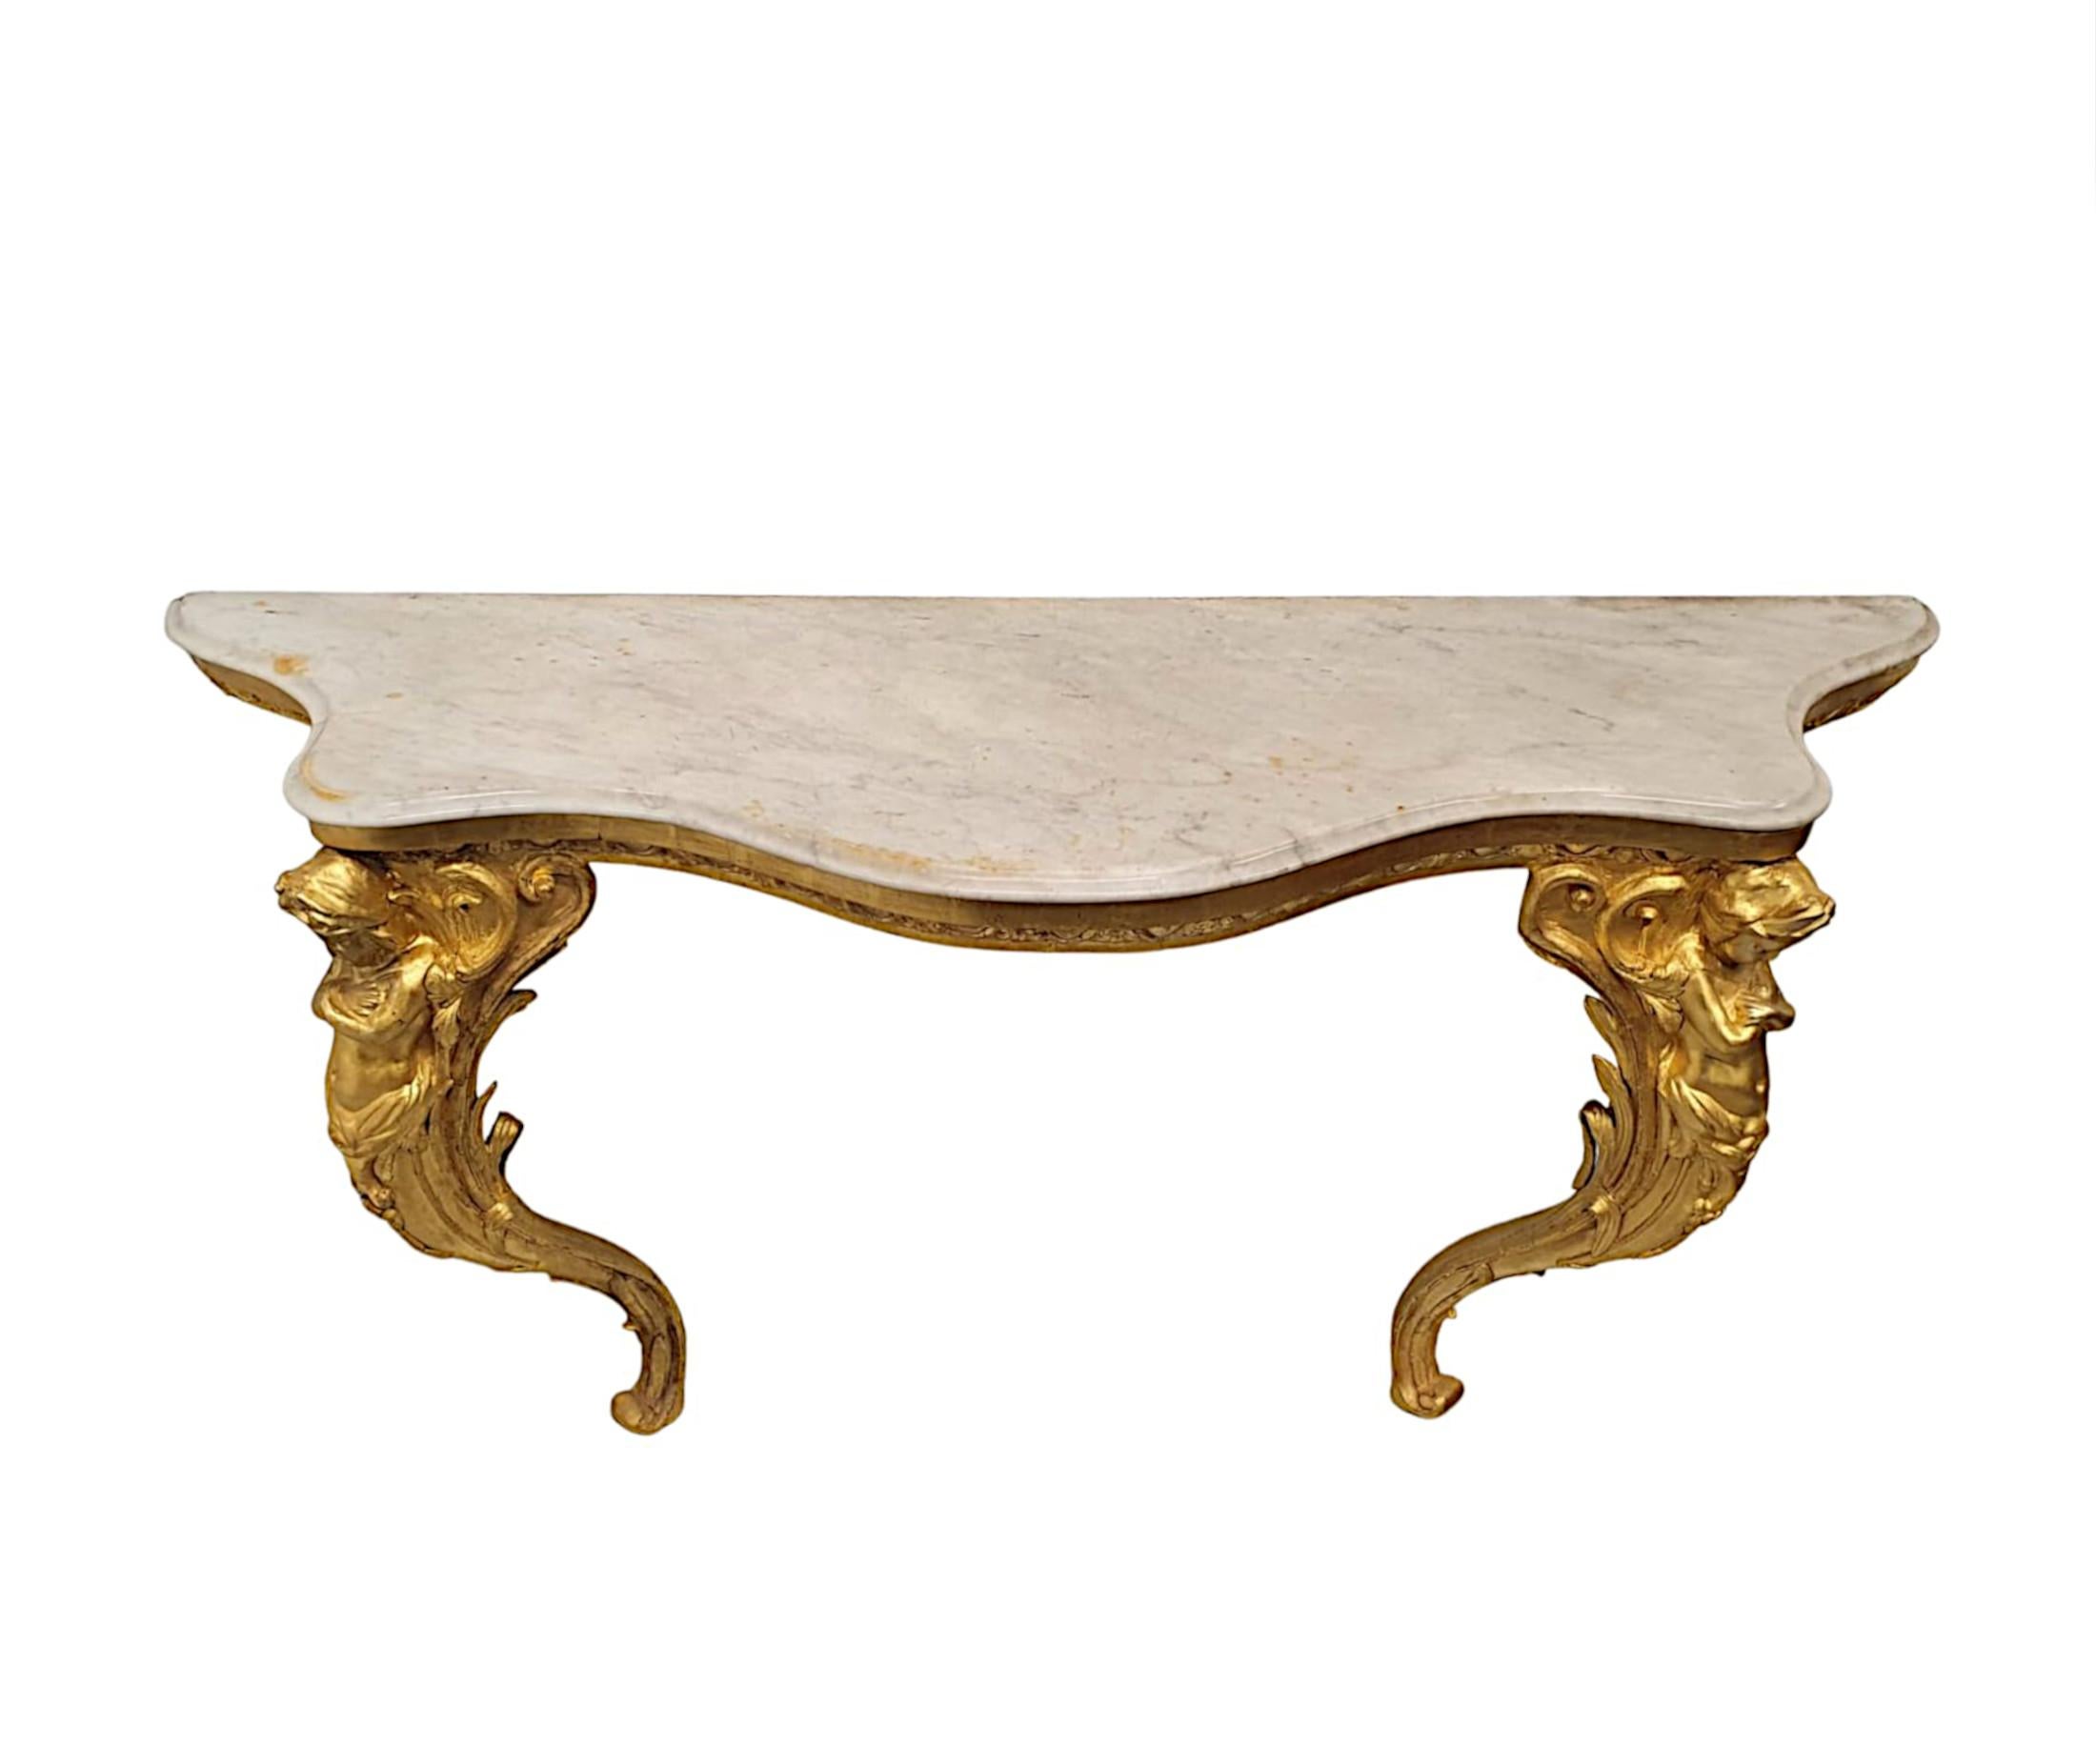 A very fine and rare 19th Century marble top giltwood console table, finely hand carved and of exceptional quality.  The gorgeous moulded Carrera white marble top of serpentine form raised over frieze with decorative foliate and egg motifs,